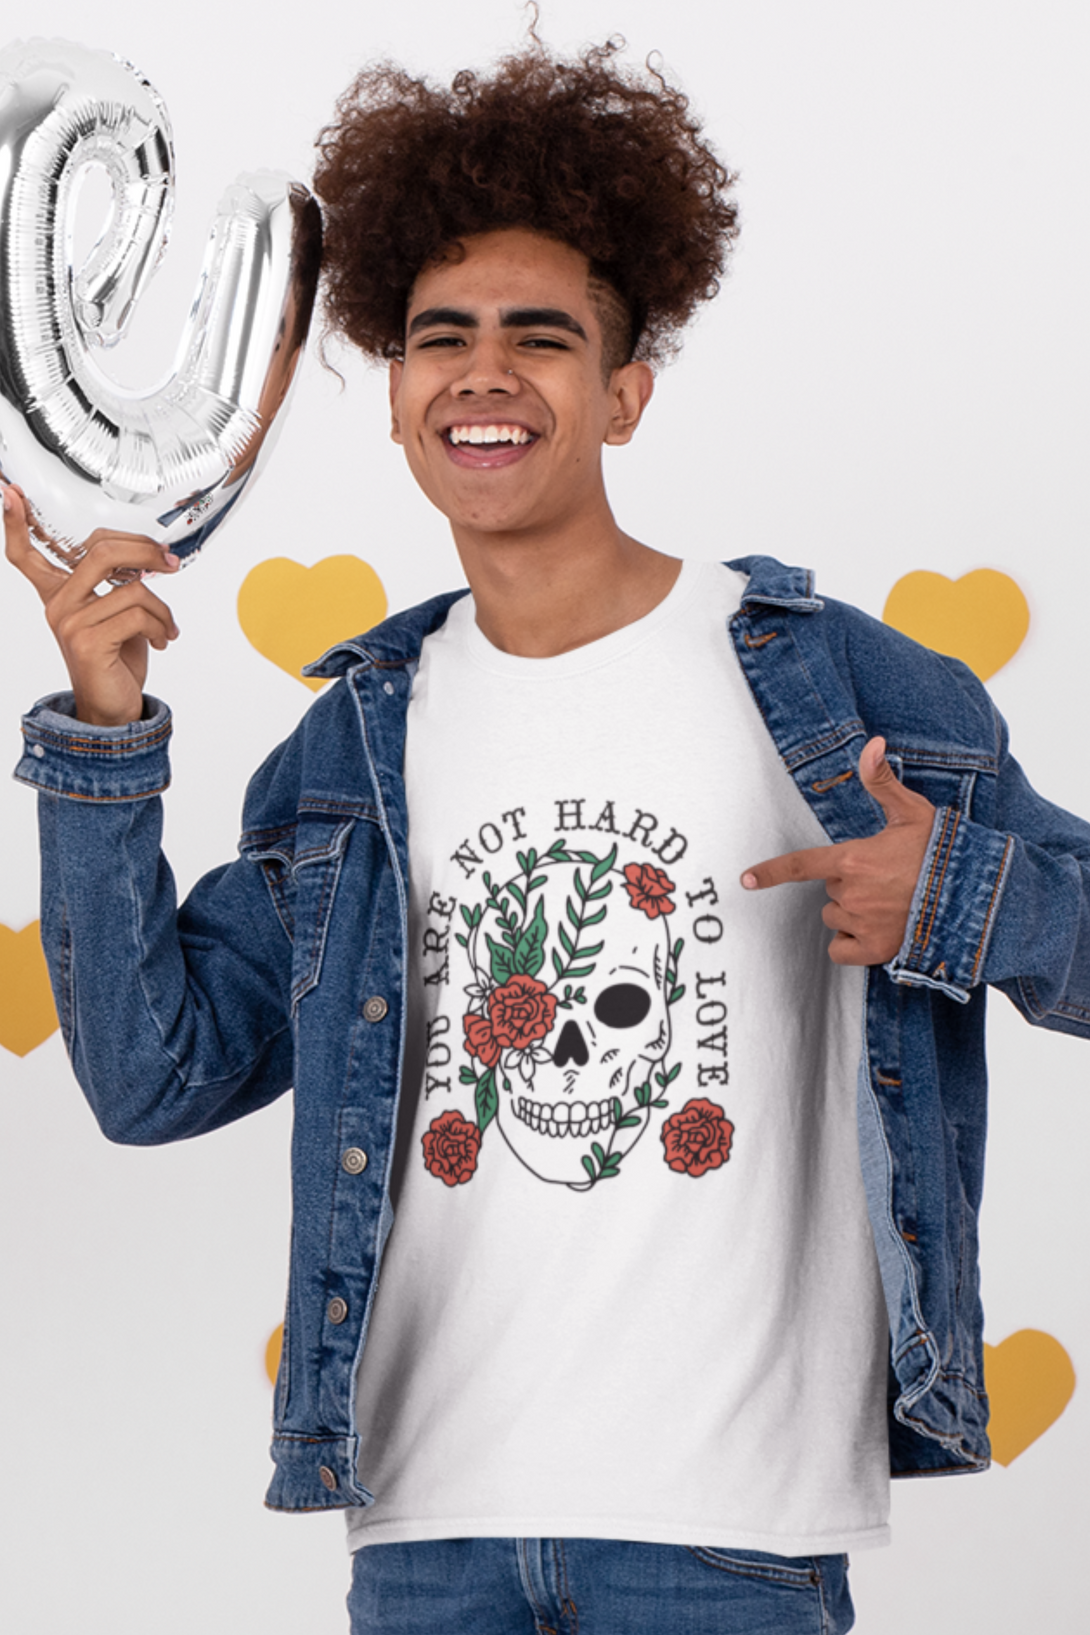 You Are Not Hard To Love Printed T-Shirt For Men - WowWaves - 11